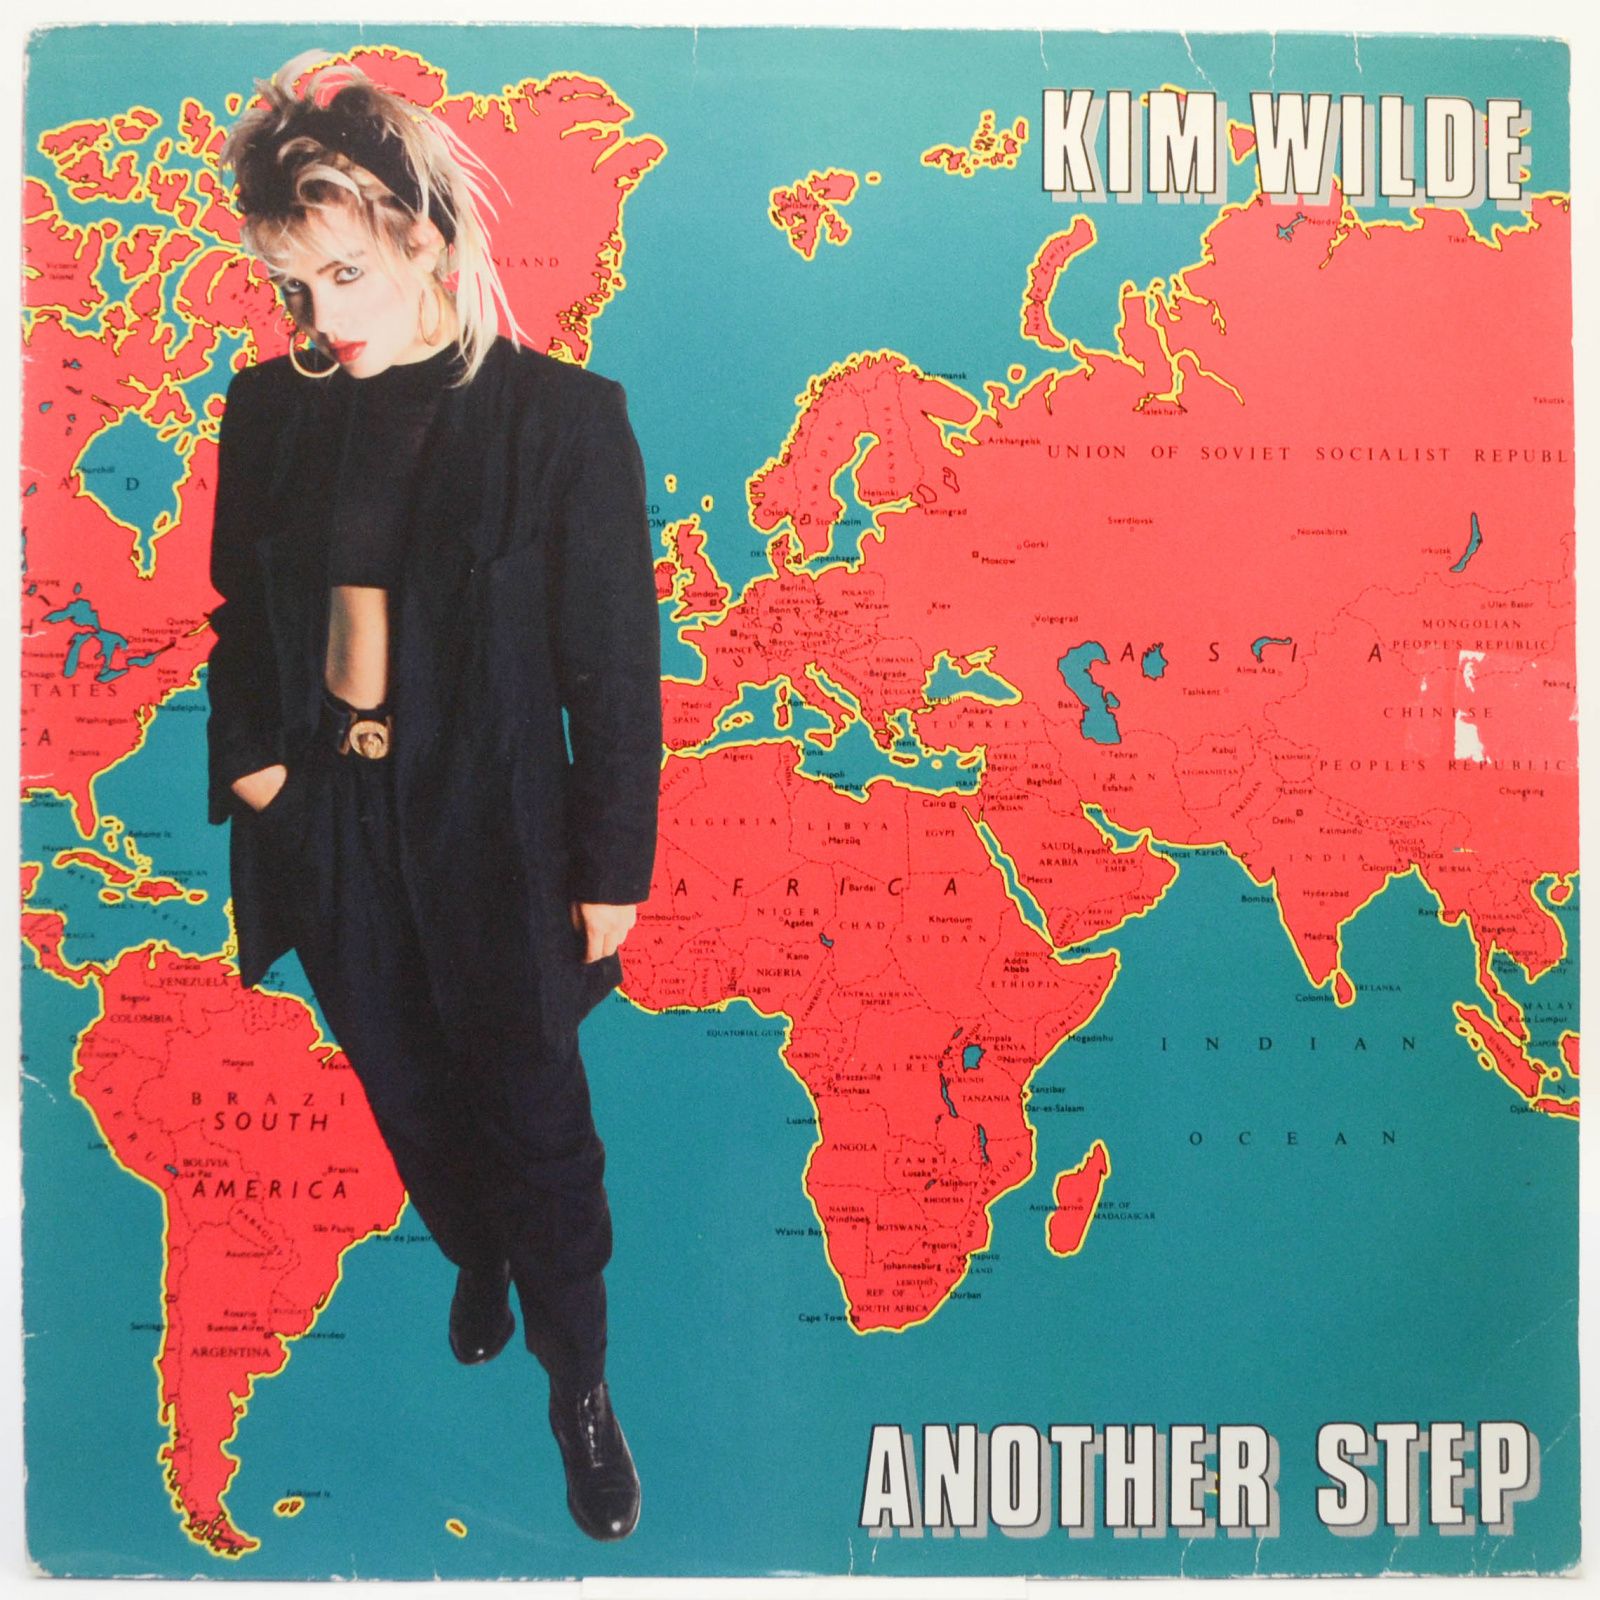 Kim Wilde — Another Step, 1986